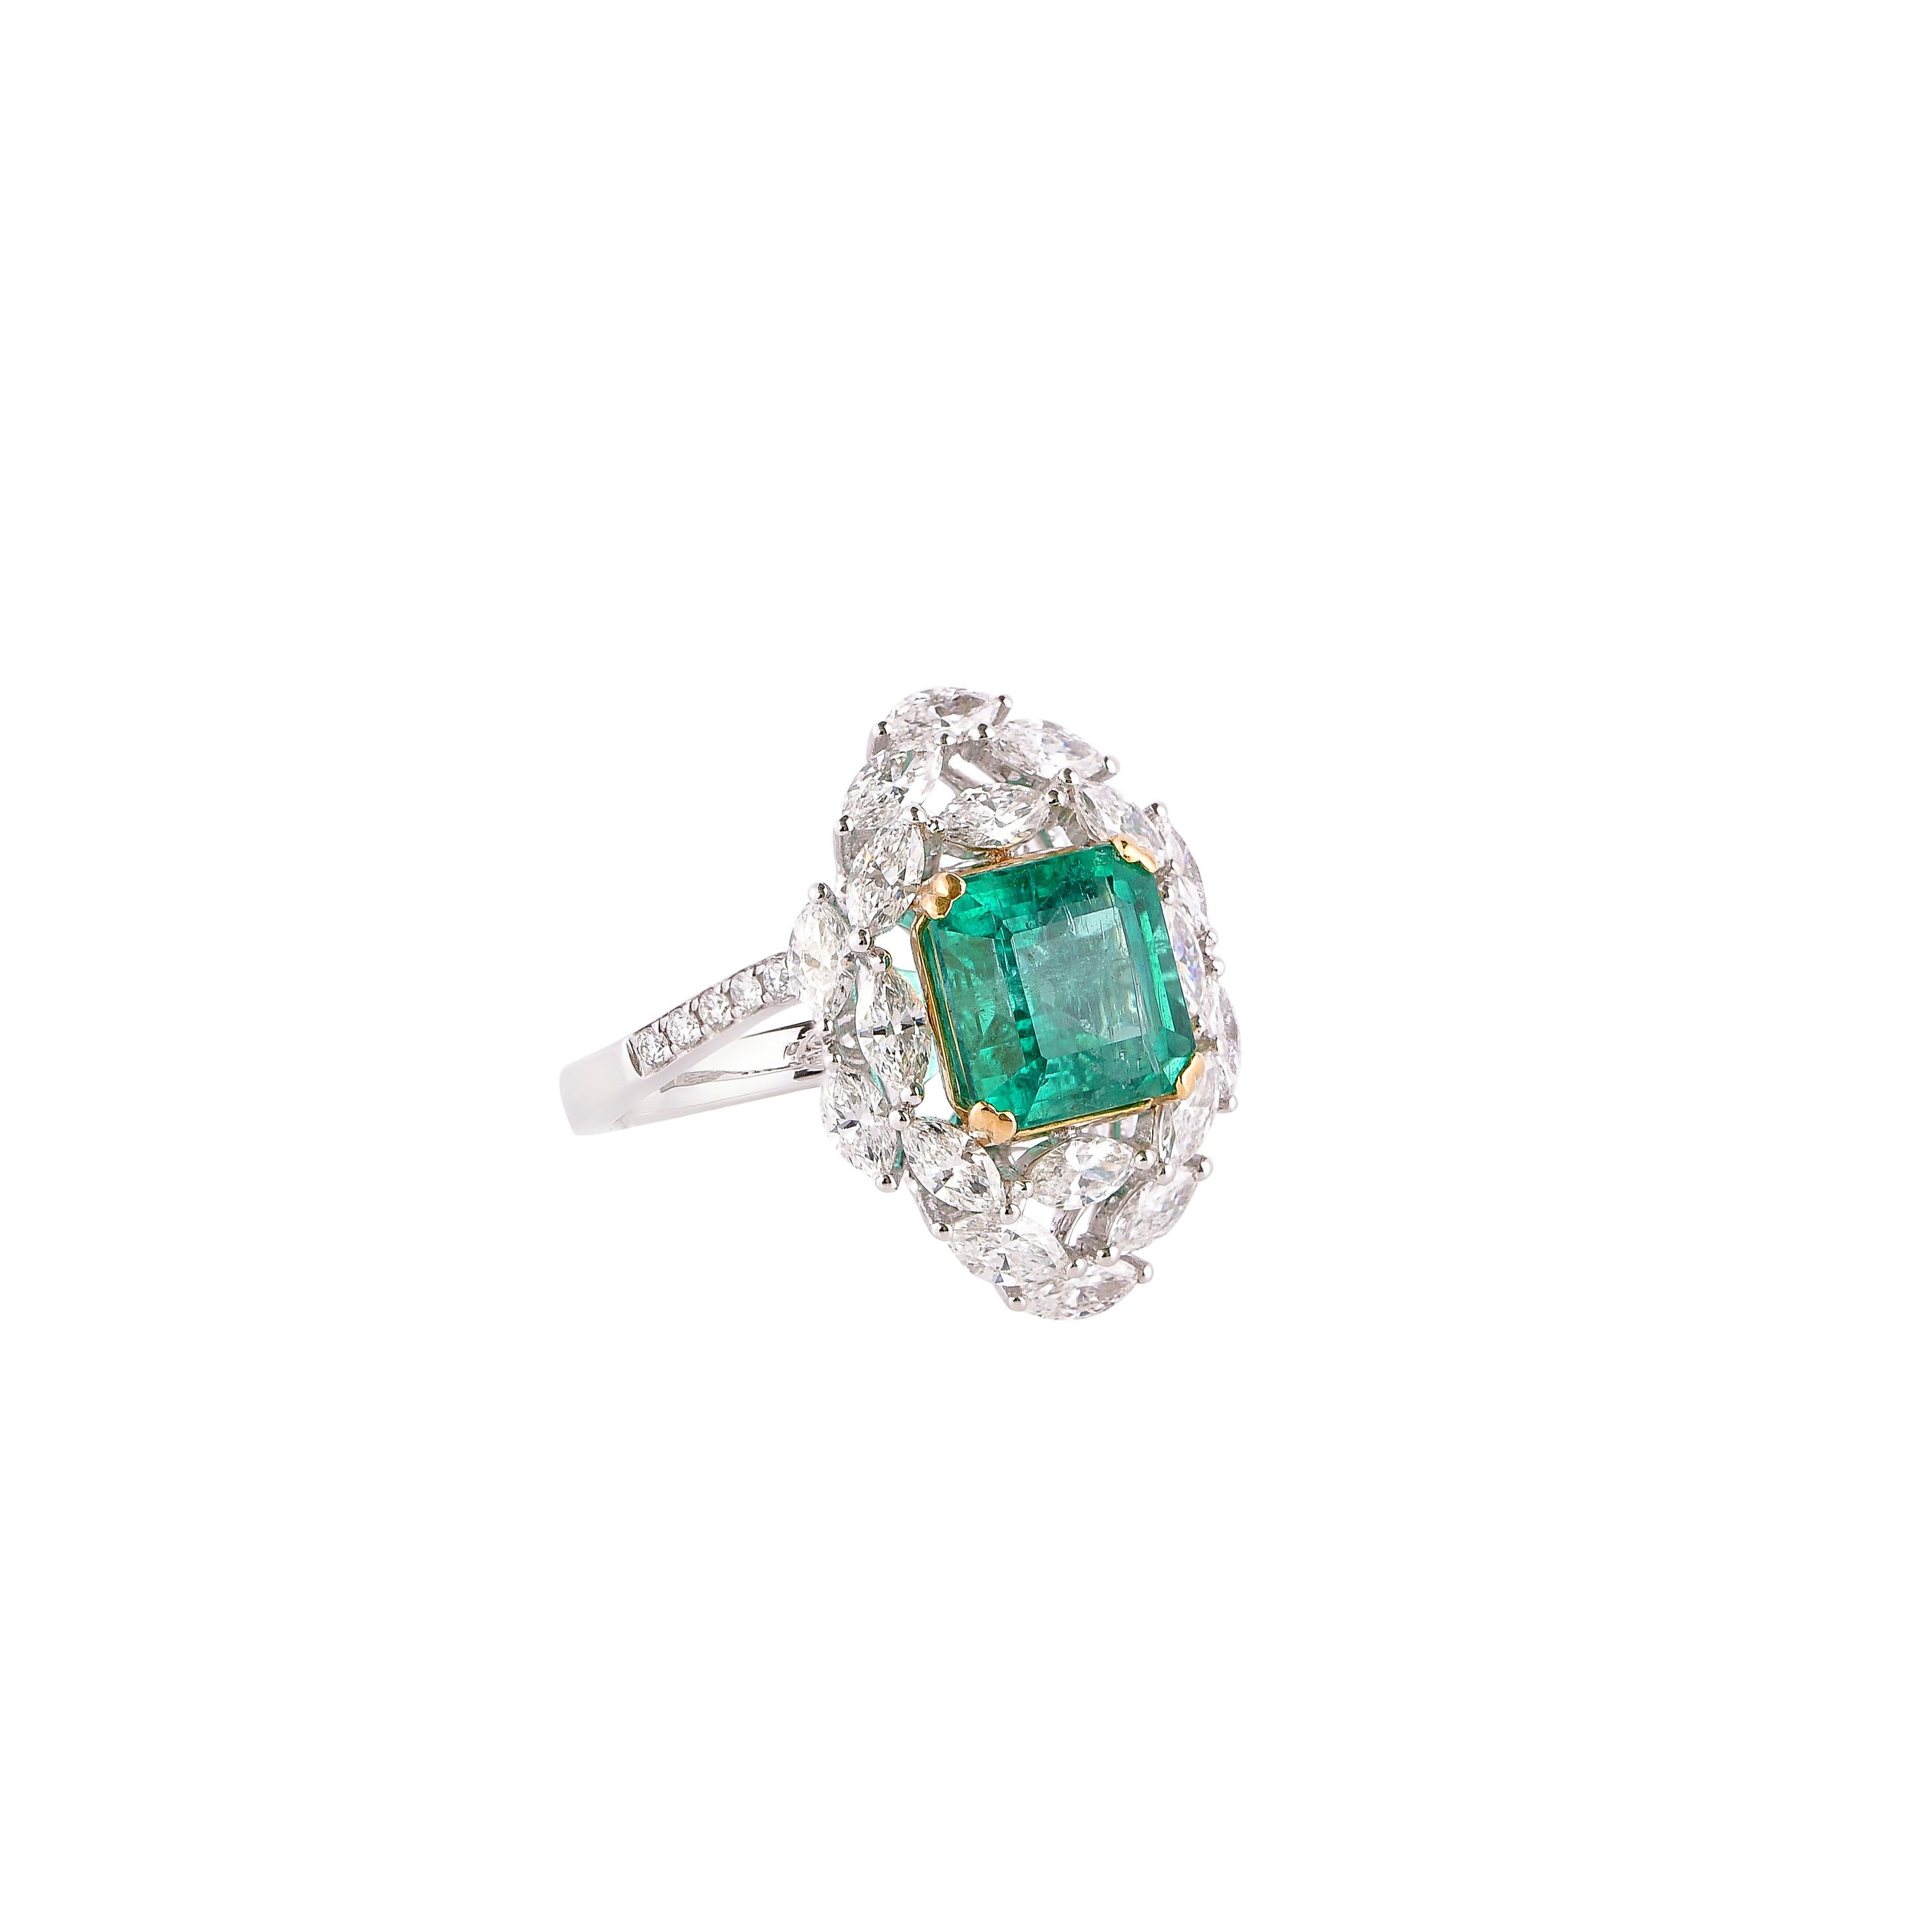 Showcasing the most vibrant Colombian and Zambian emeralds and diamonds, Sunita Nahata dedicates this collection to her home city of Jaipur where the jewelry industry dates back to the early 1700s. Jaipur is also an epicenter for the global emerald